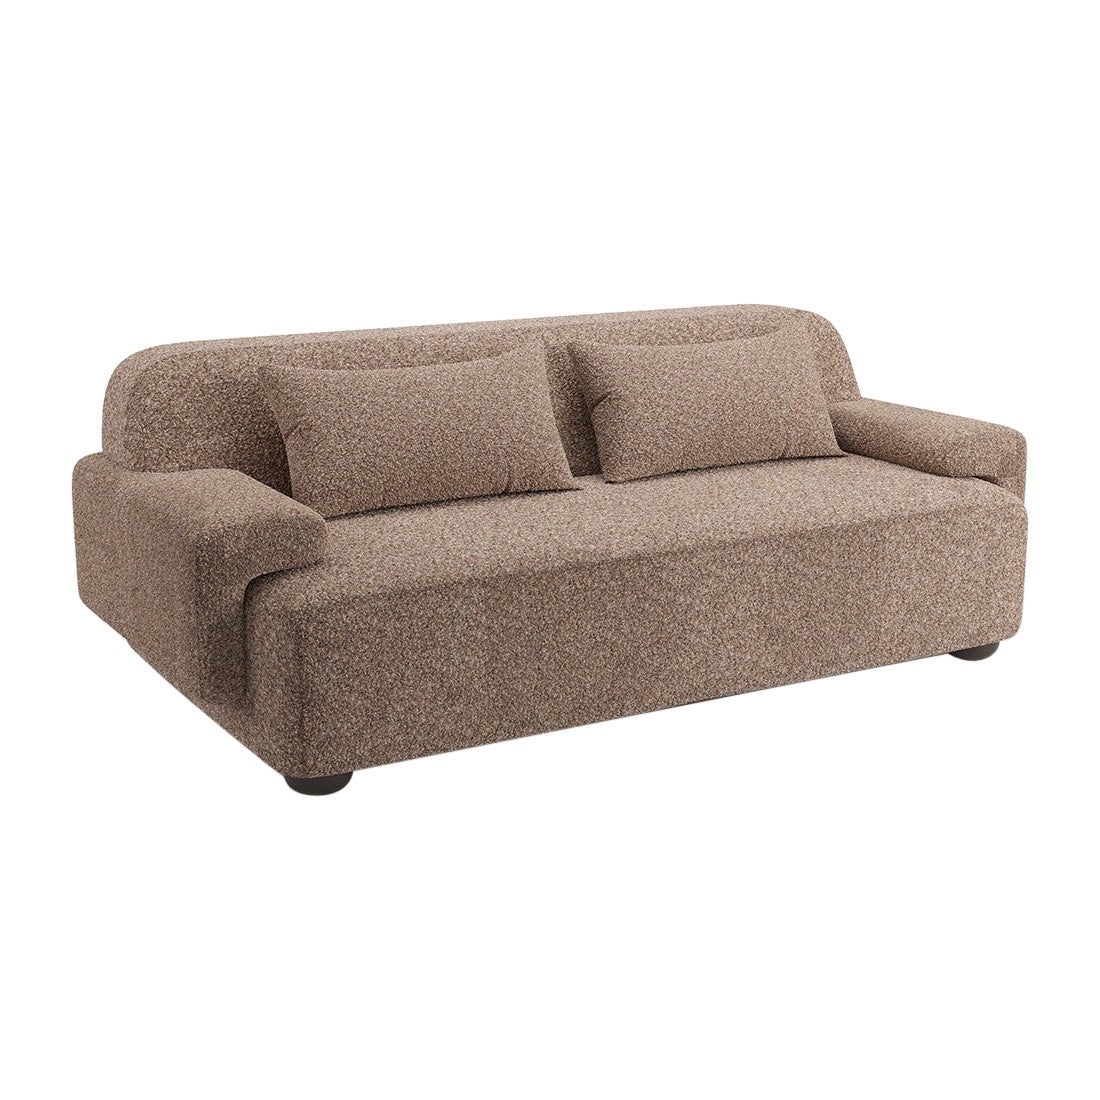 Popus Editions Lena 2.5 Seater Sofa in Ciotello Athena Loop Yarn Upholstery For Sale